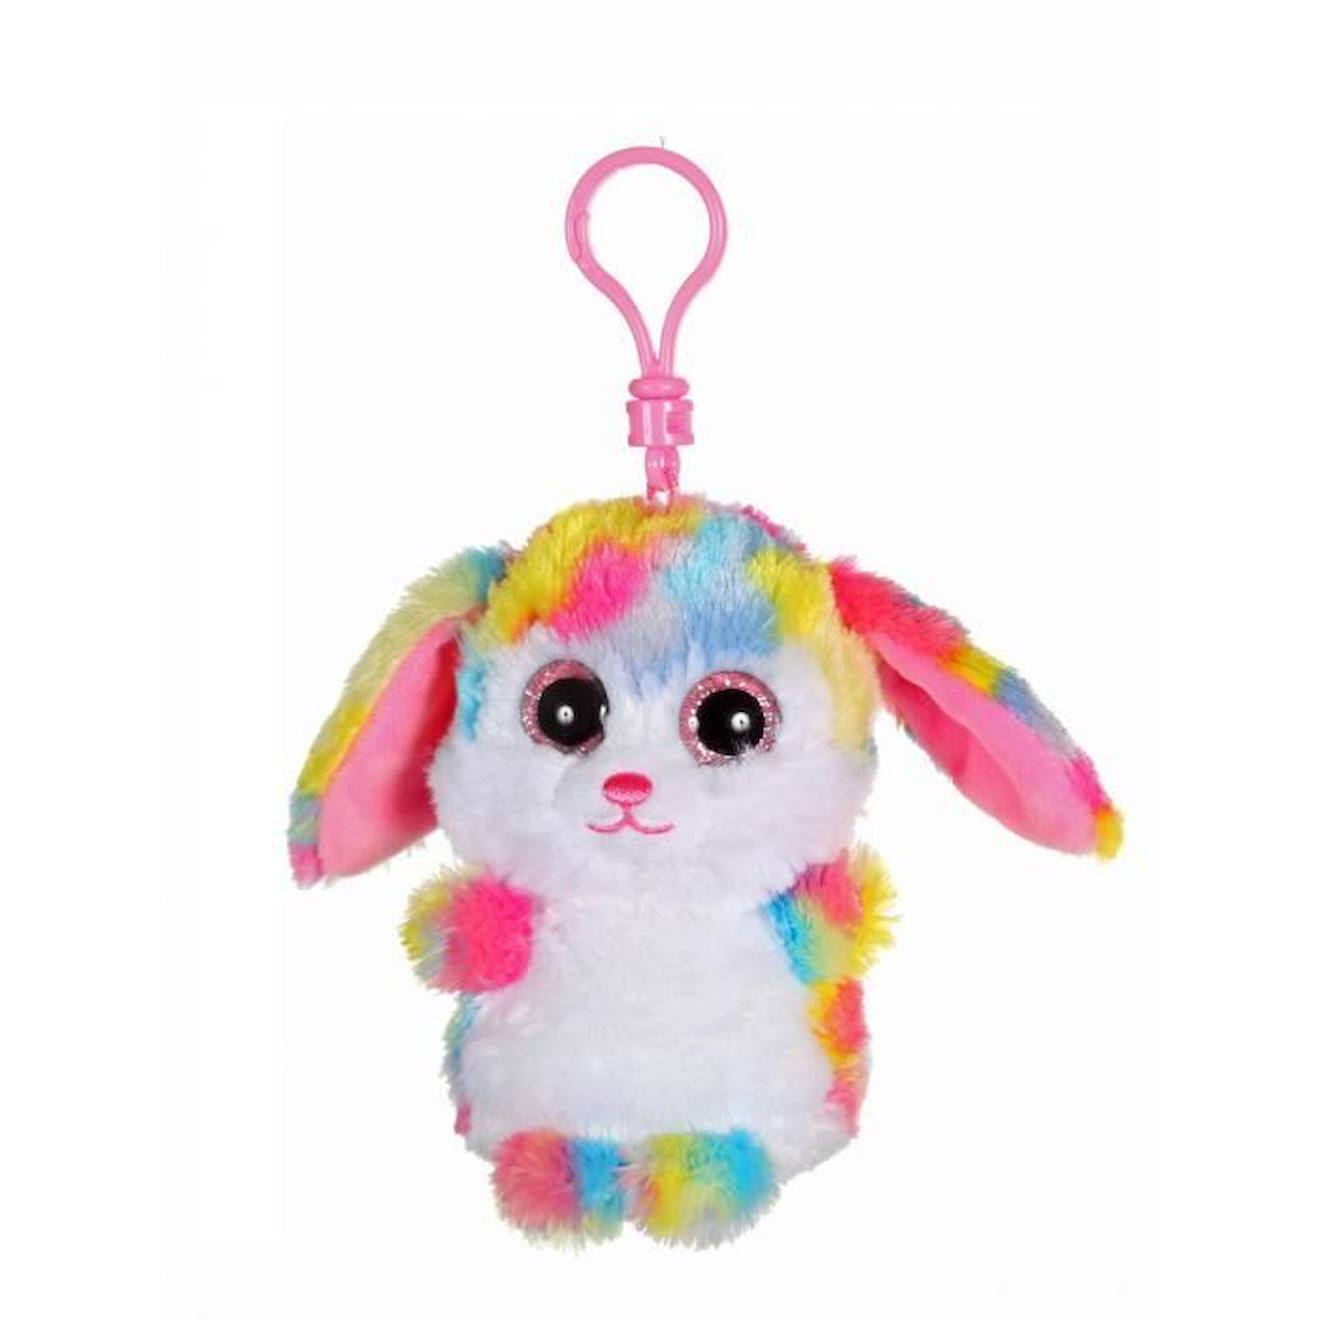 Gipsy Toys - Porte-clés - Brilloo Friends - Lapin Troody - 9 Cm - Rose & Jaune Rose